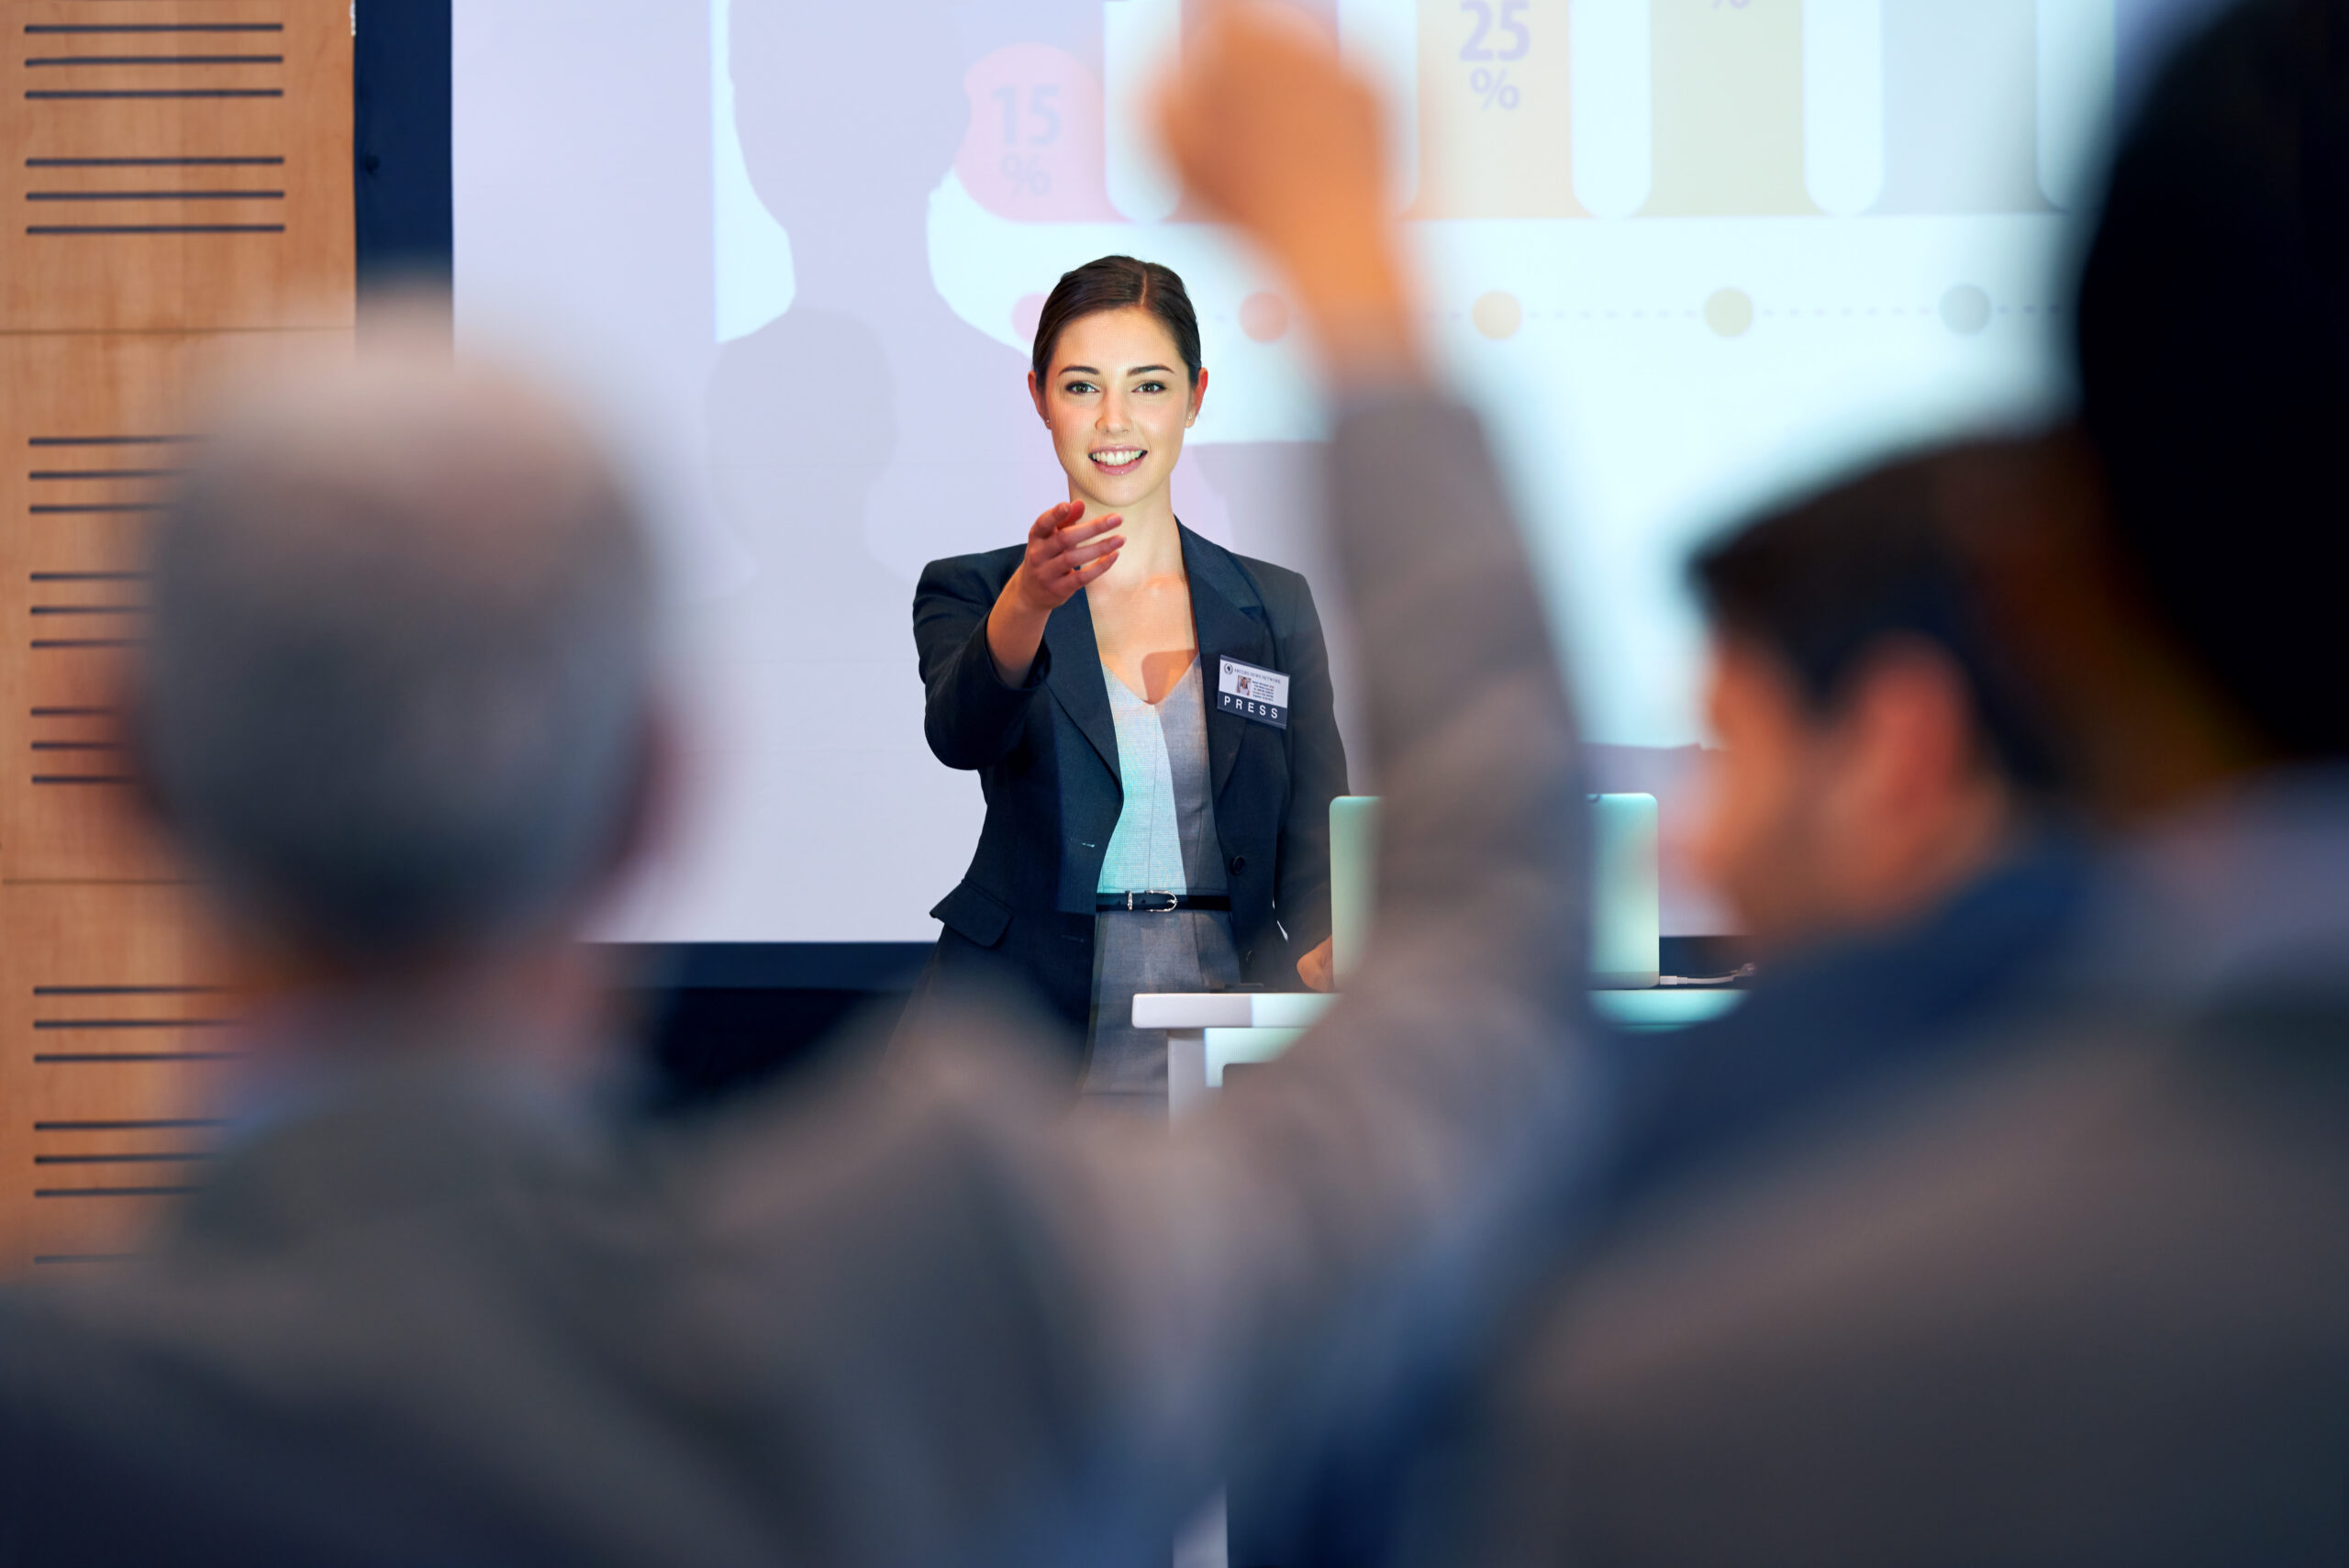 A portrait of a businesswoman gesturing while giving a presentation at a press conference